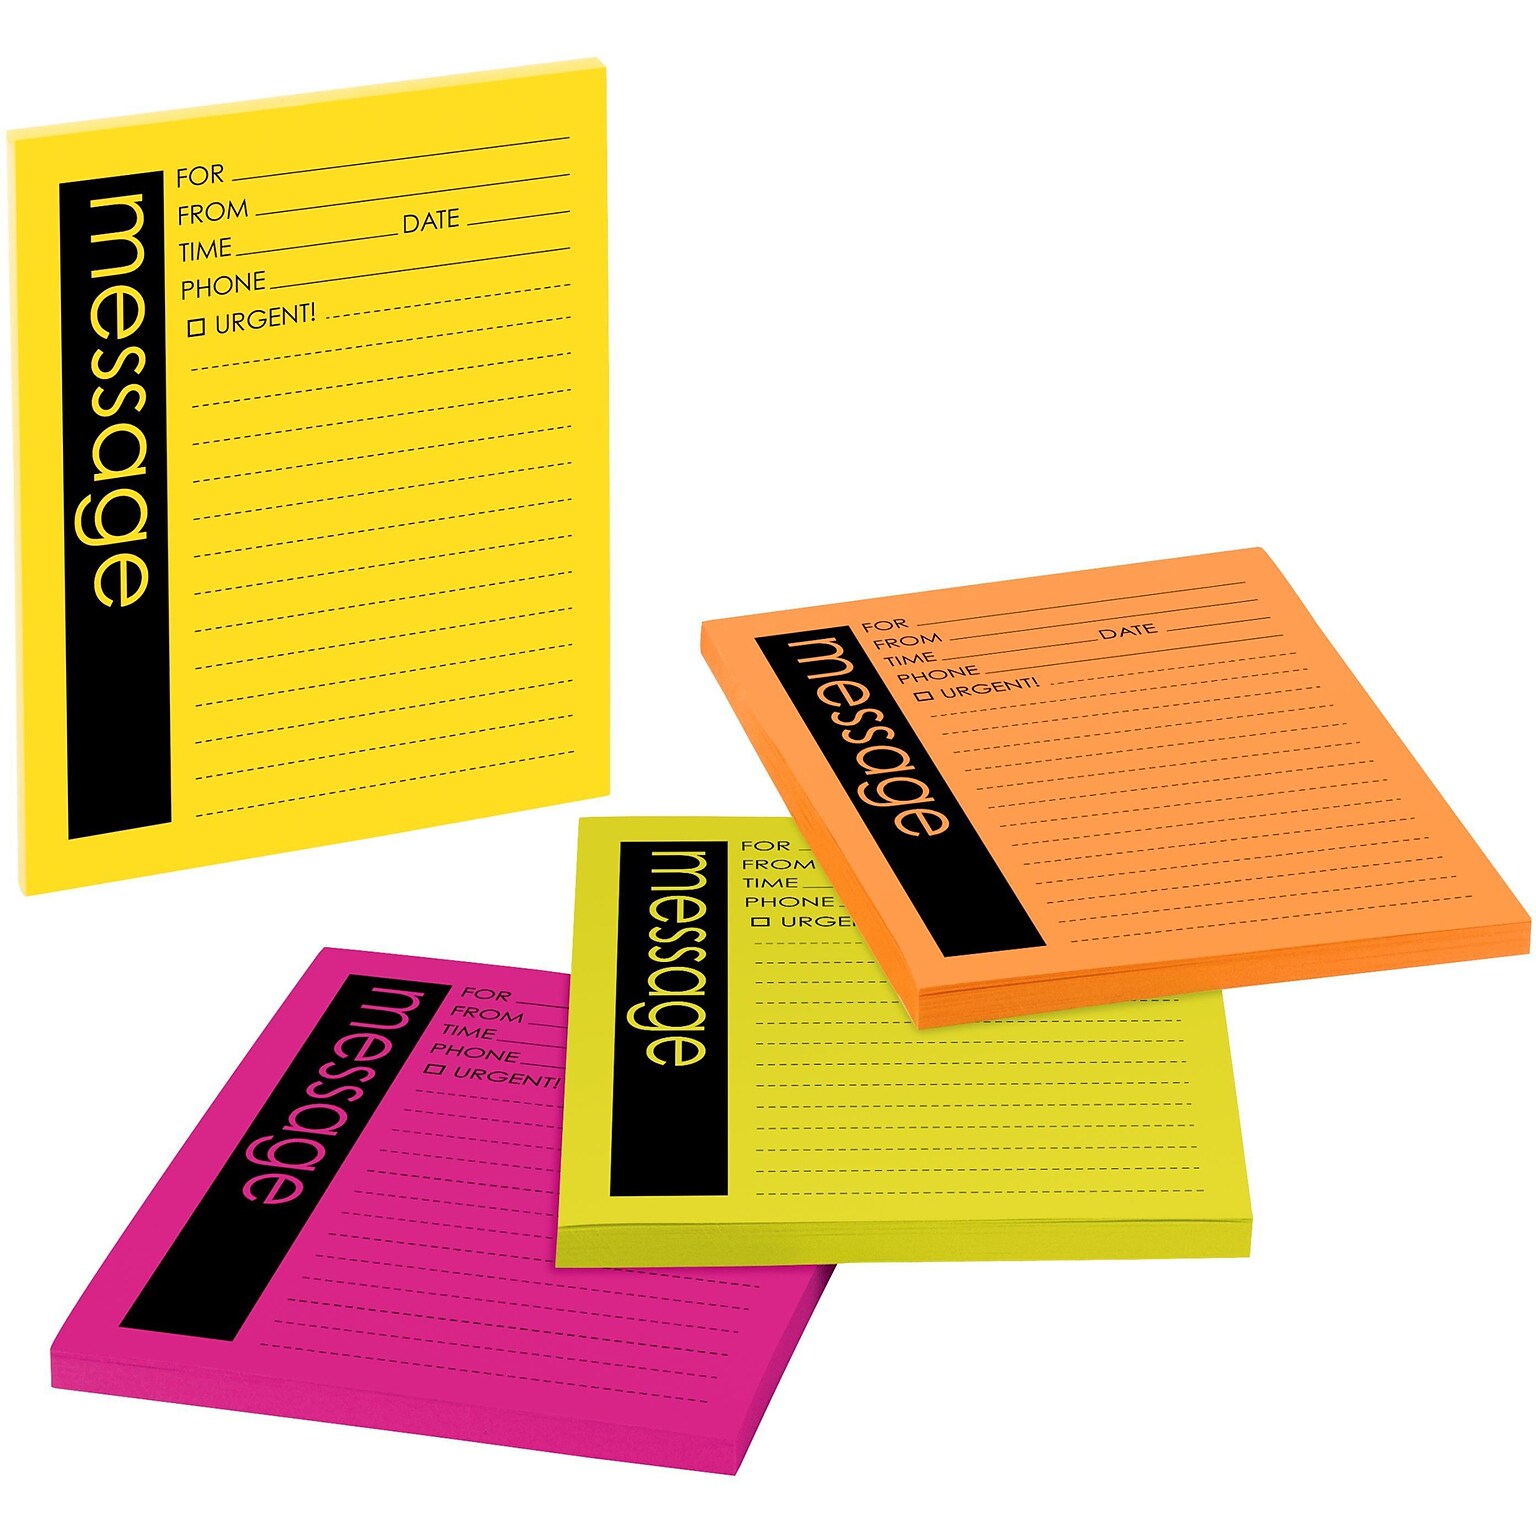 Post-it Super Sticky Telephone Message Notes, 4 x 5, Energy Boost Collection, Lined, 4 Pads (7679-4)